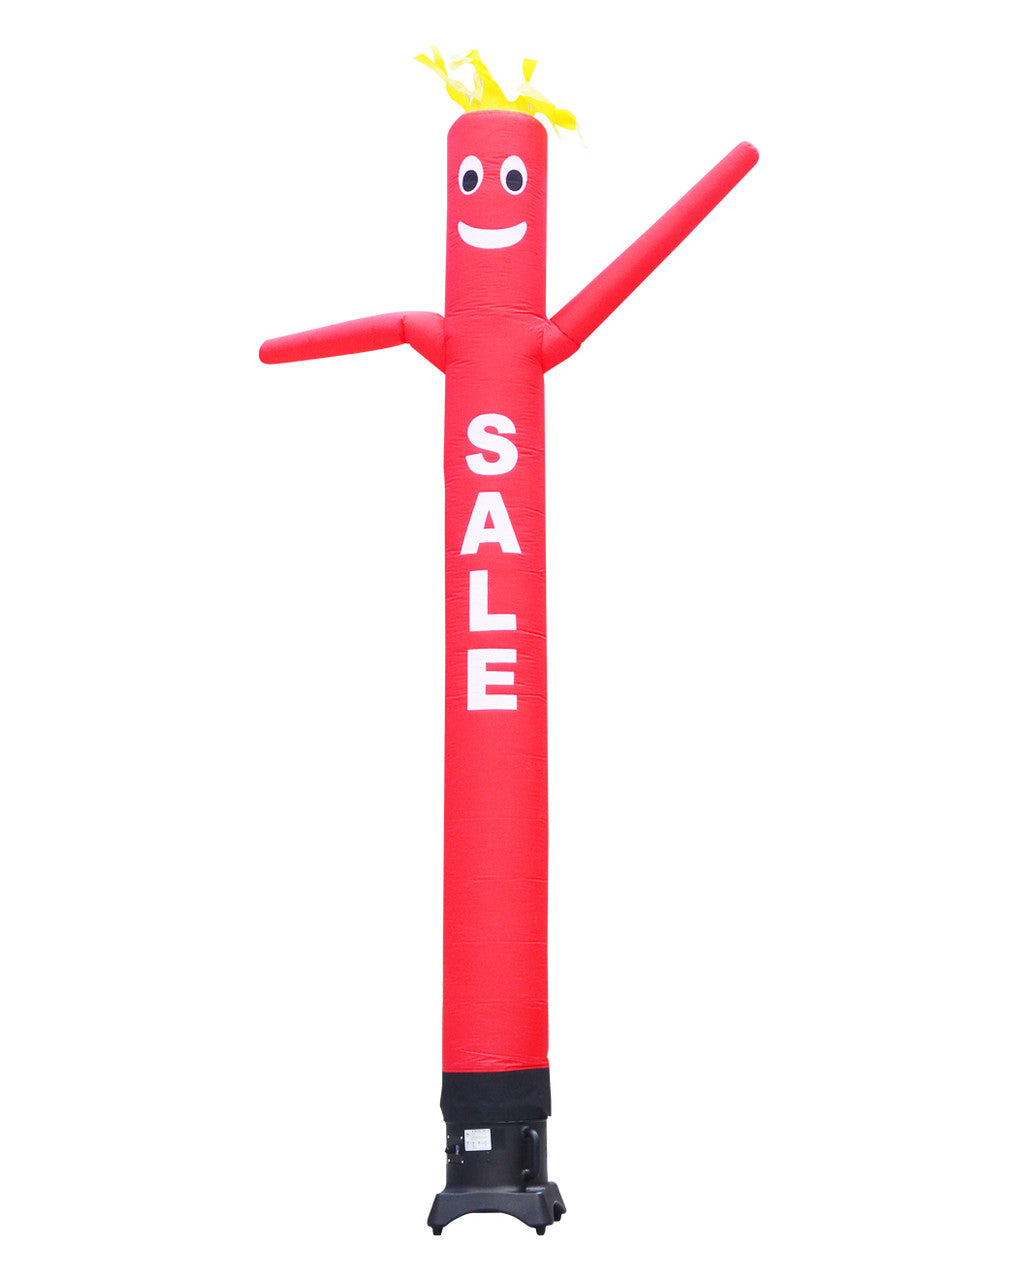 10ft Sale Red Air Puppet Dancer Inflatable Wacky Wavy Tube Man